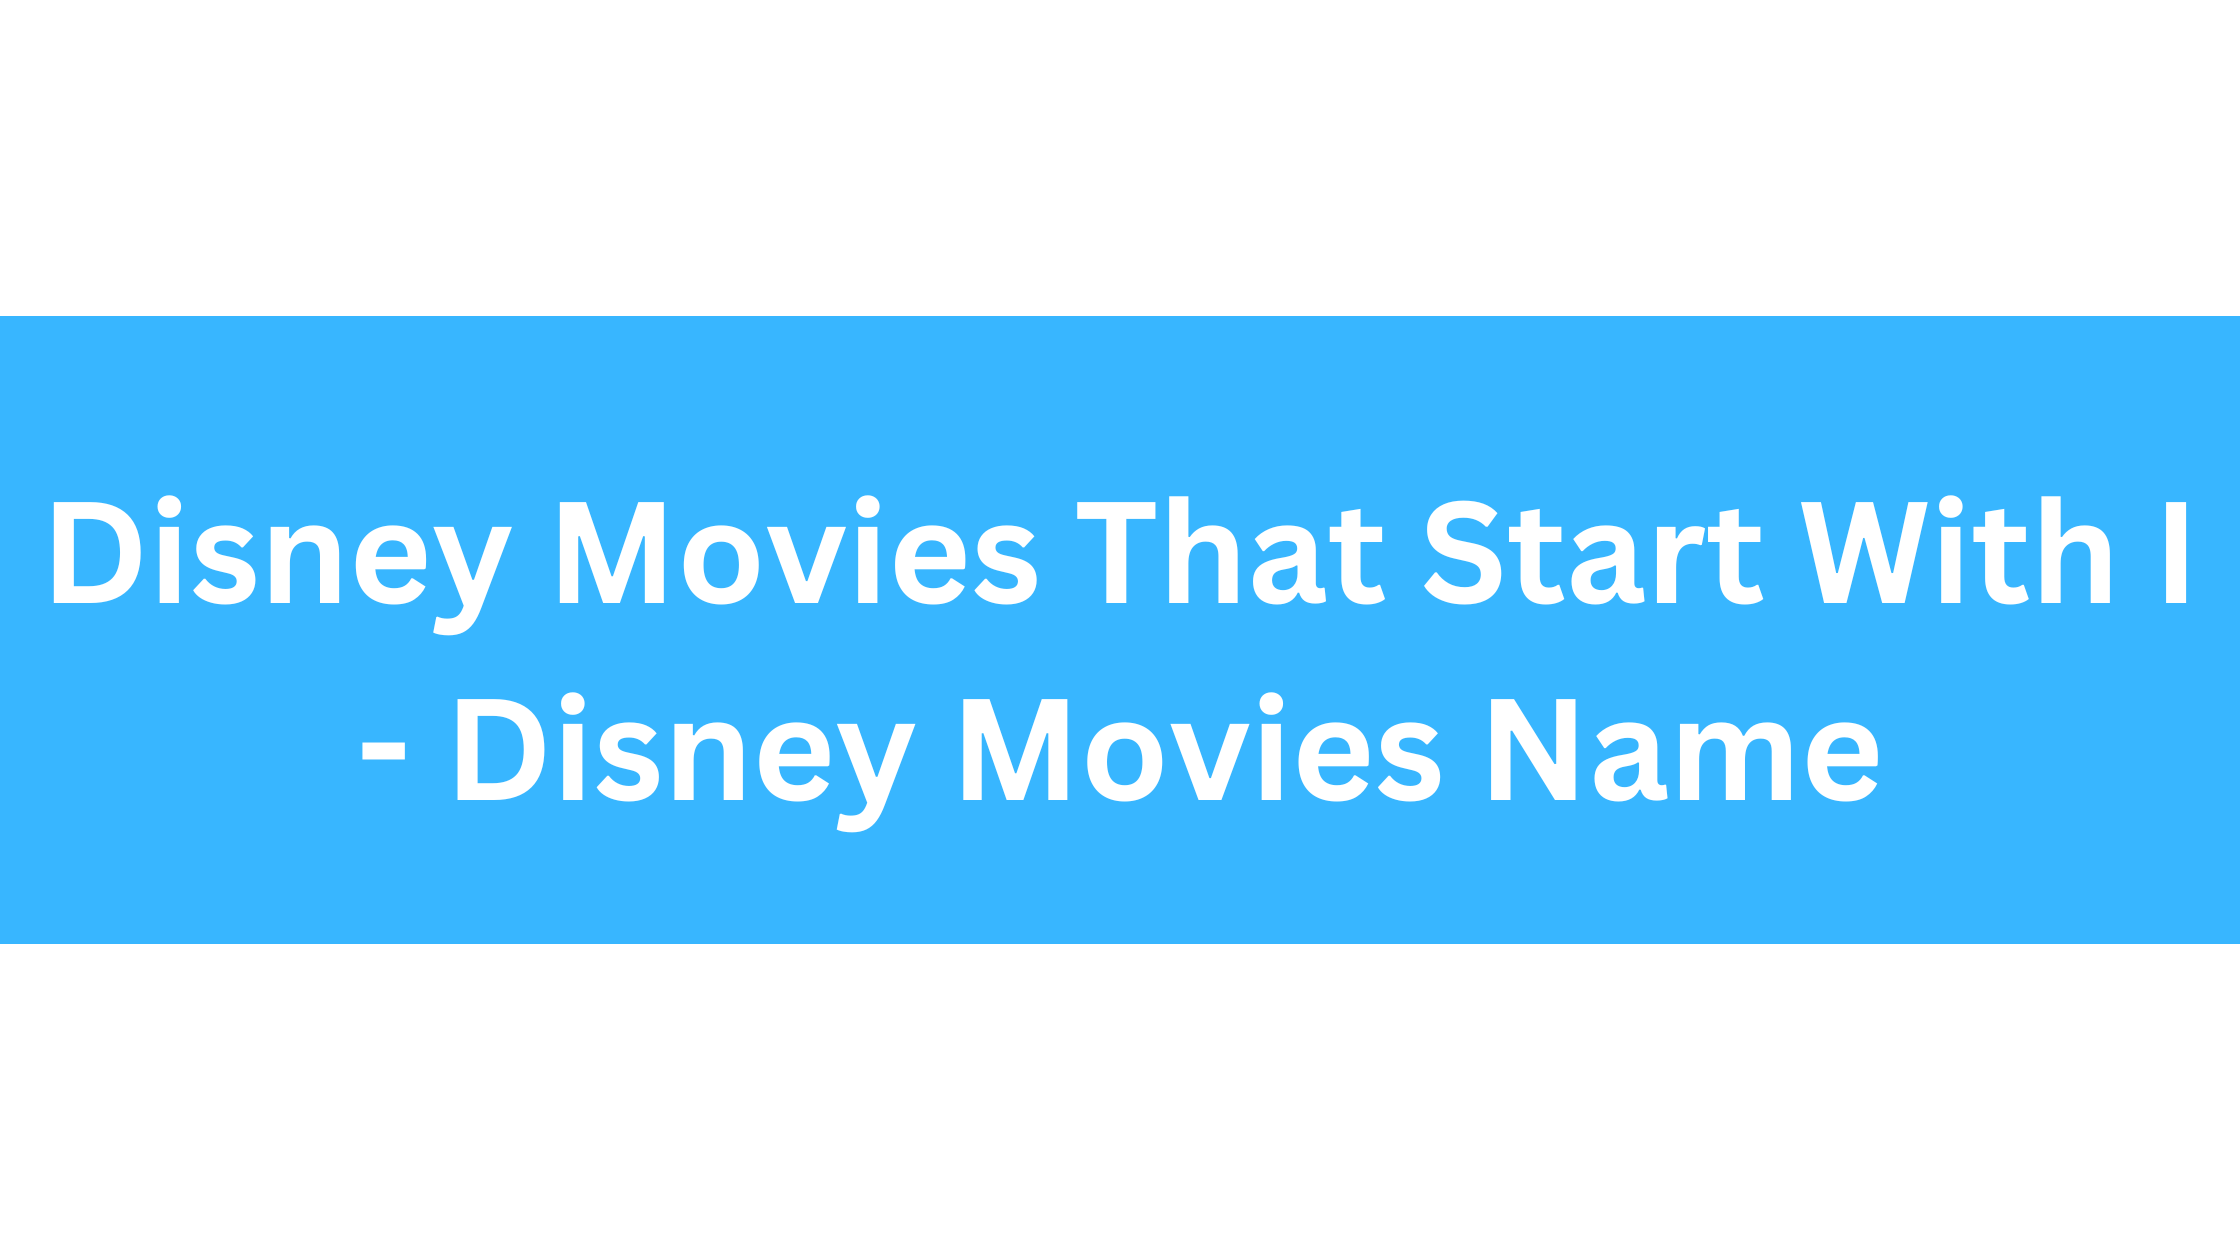 Disney Movies That Start With I